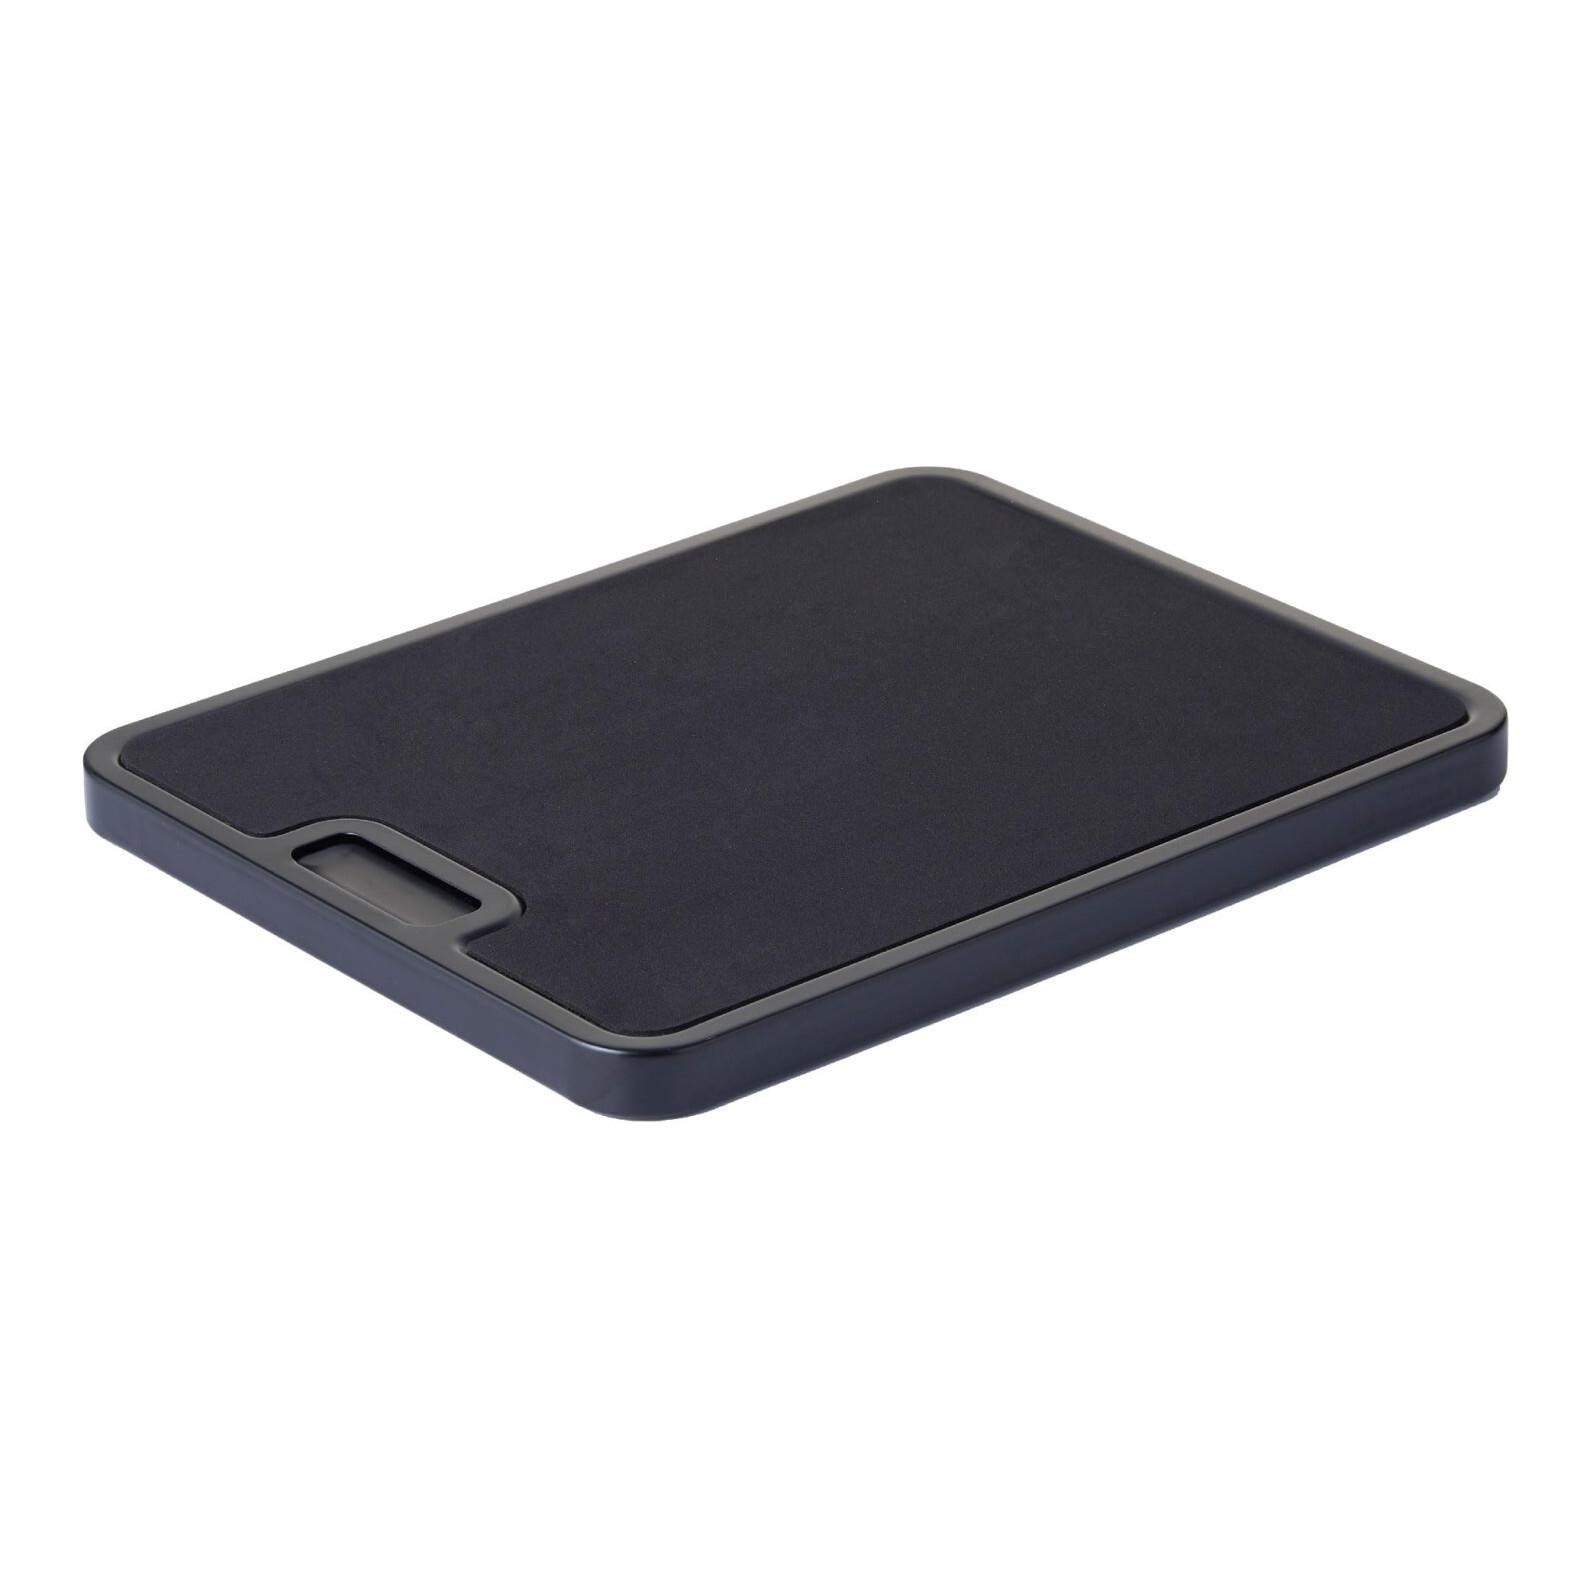 Nifty Small Appliance Rolling Tray - Black, Home K